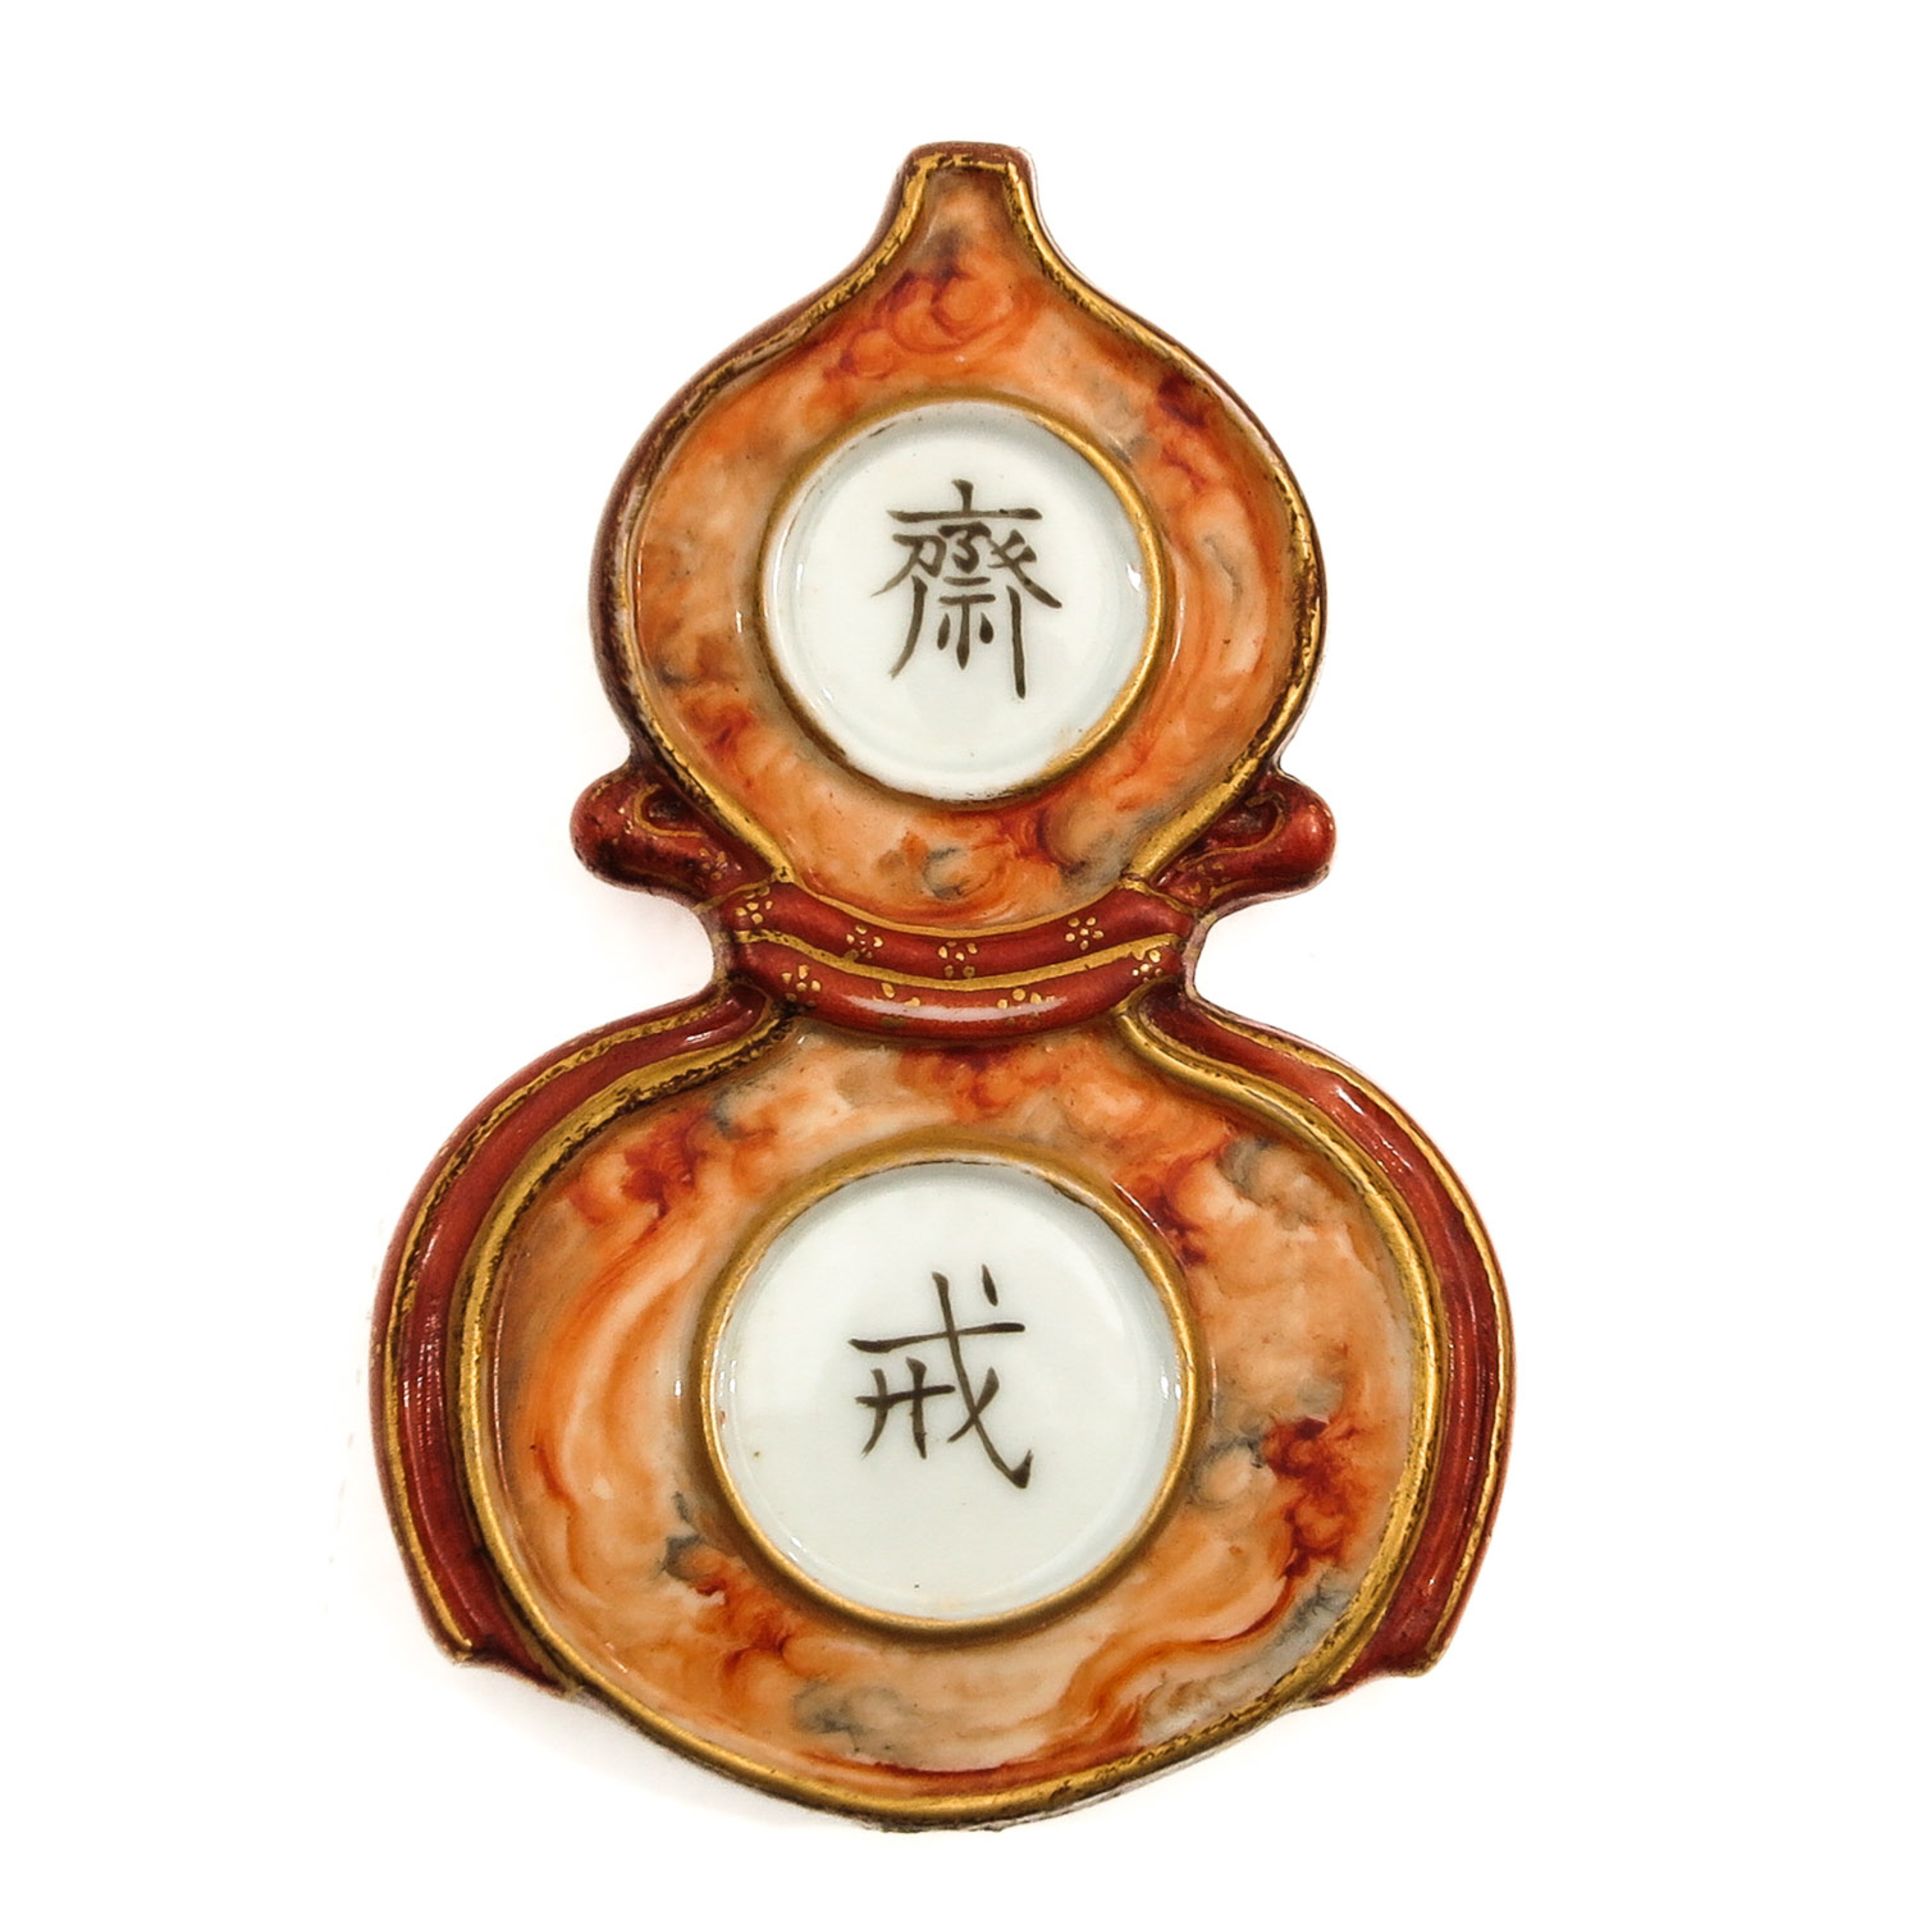 A Small Chinese Medallion